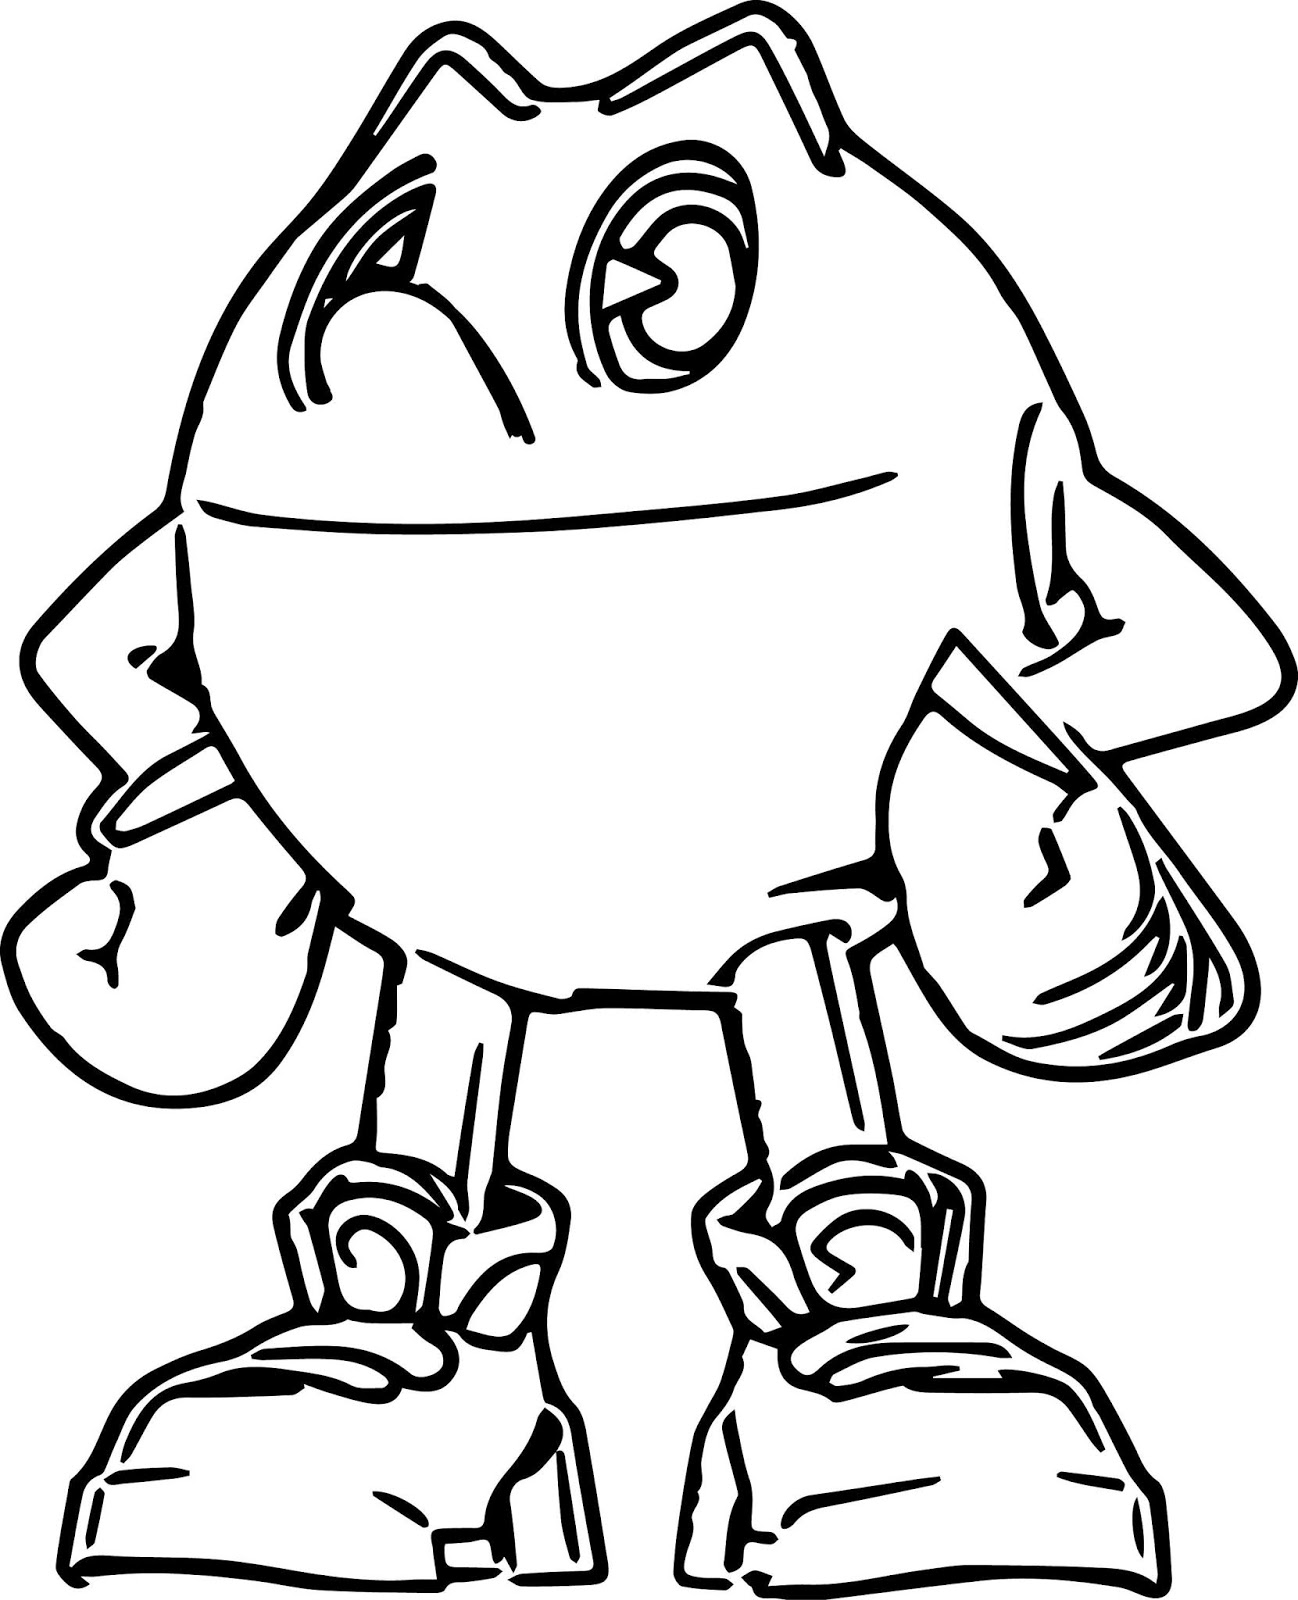 Cool Pacman Coloring Page Free Printable Coloring Pages for Kids